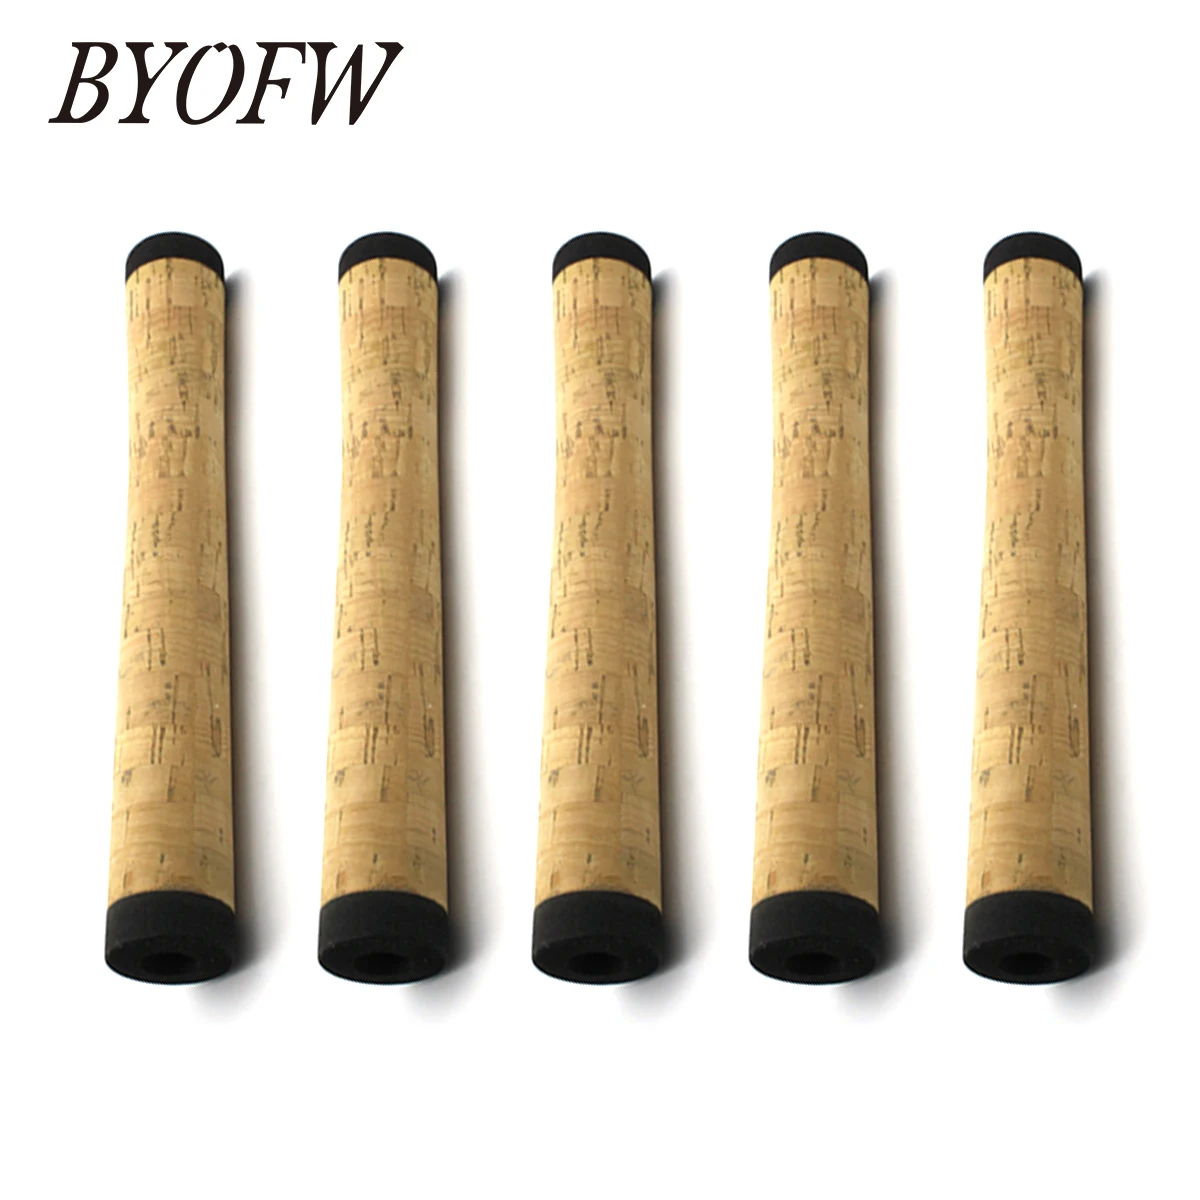 BYOFW 5 PCs 195mm Composite Cork Spinning Fishing Rod Handle Grip Strength  DIY For Pole Building Repair Ultra Light Replacement - AliExpress